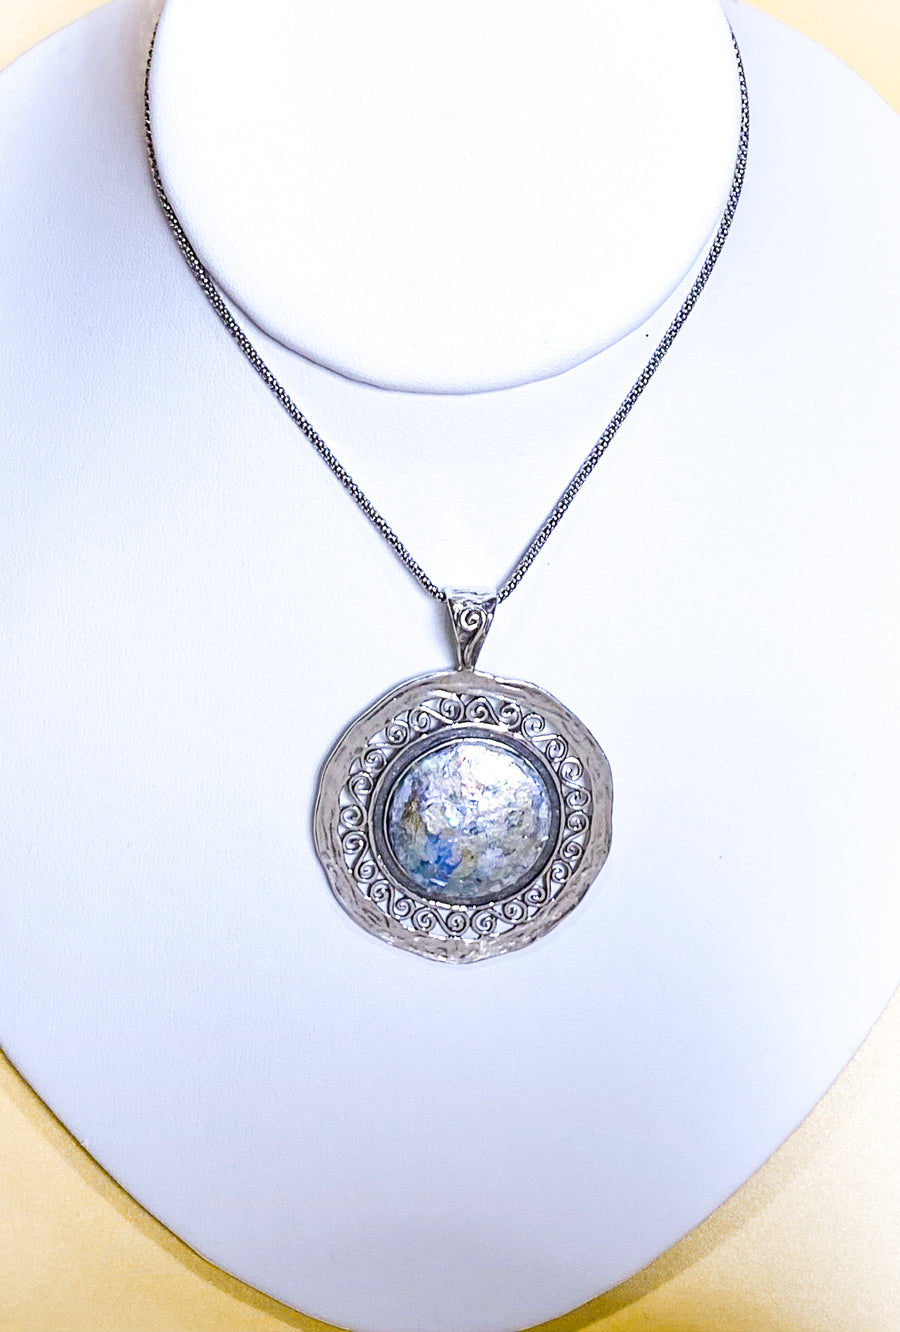 Exquisite Roman Glass Pendant In Sterling Silver